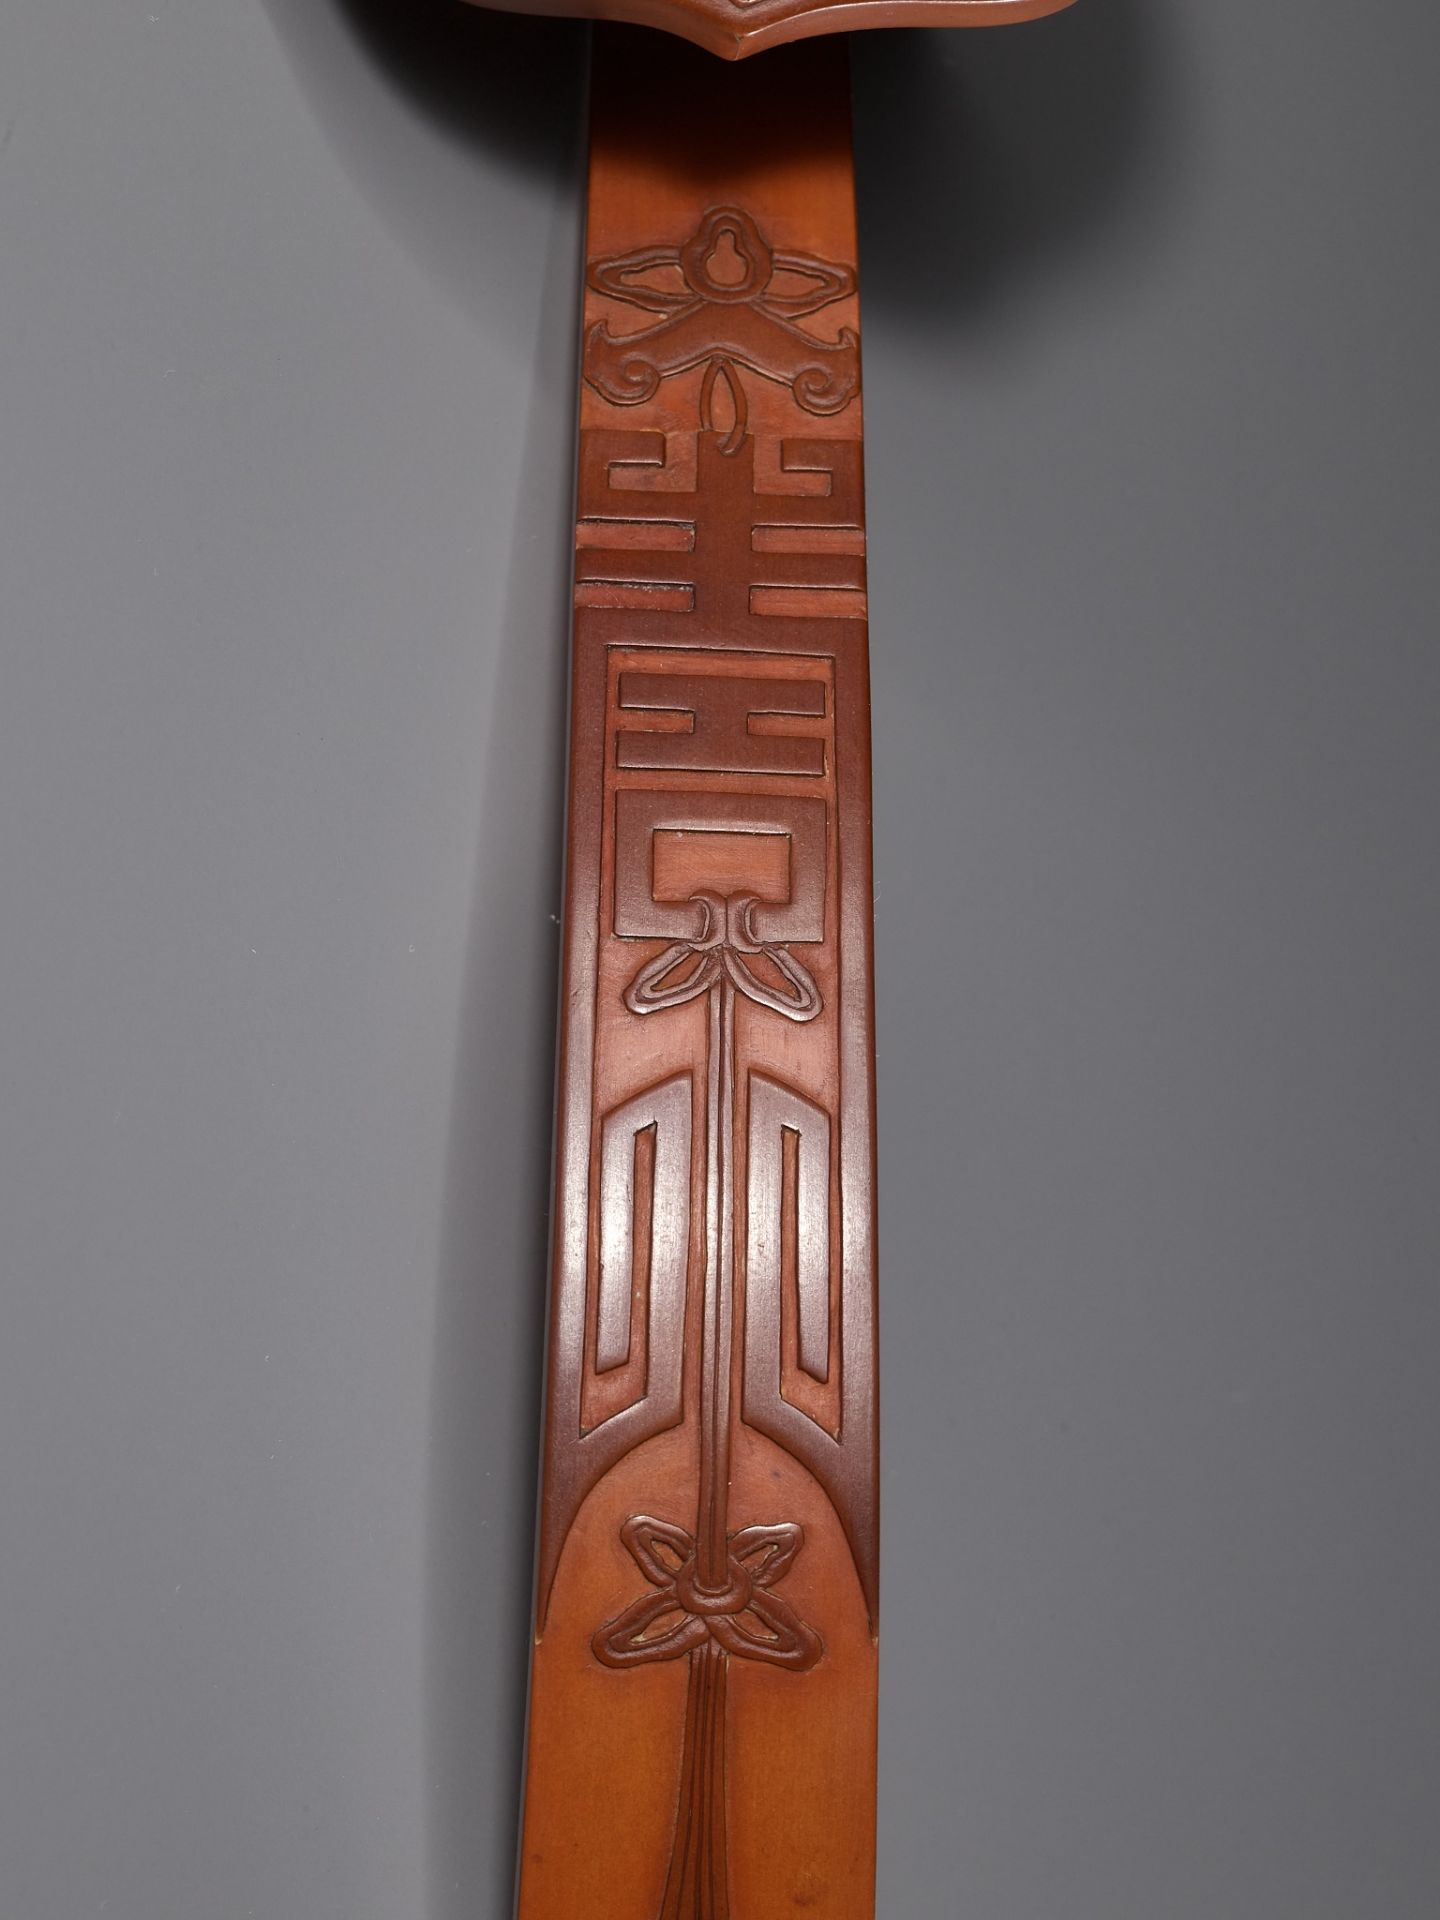 A RARE BAMBOO-VENEER RUYI SCEPTRE, QIANLONG PERIOD, IMPERIALLY INSCRIBED WITH A POEM - Image 10 of 15